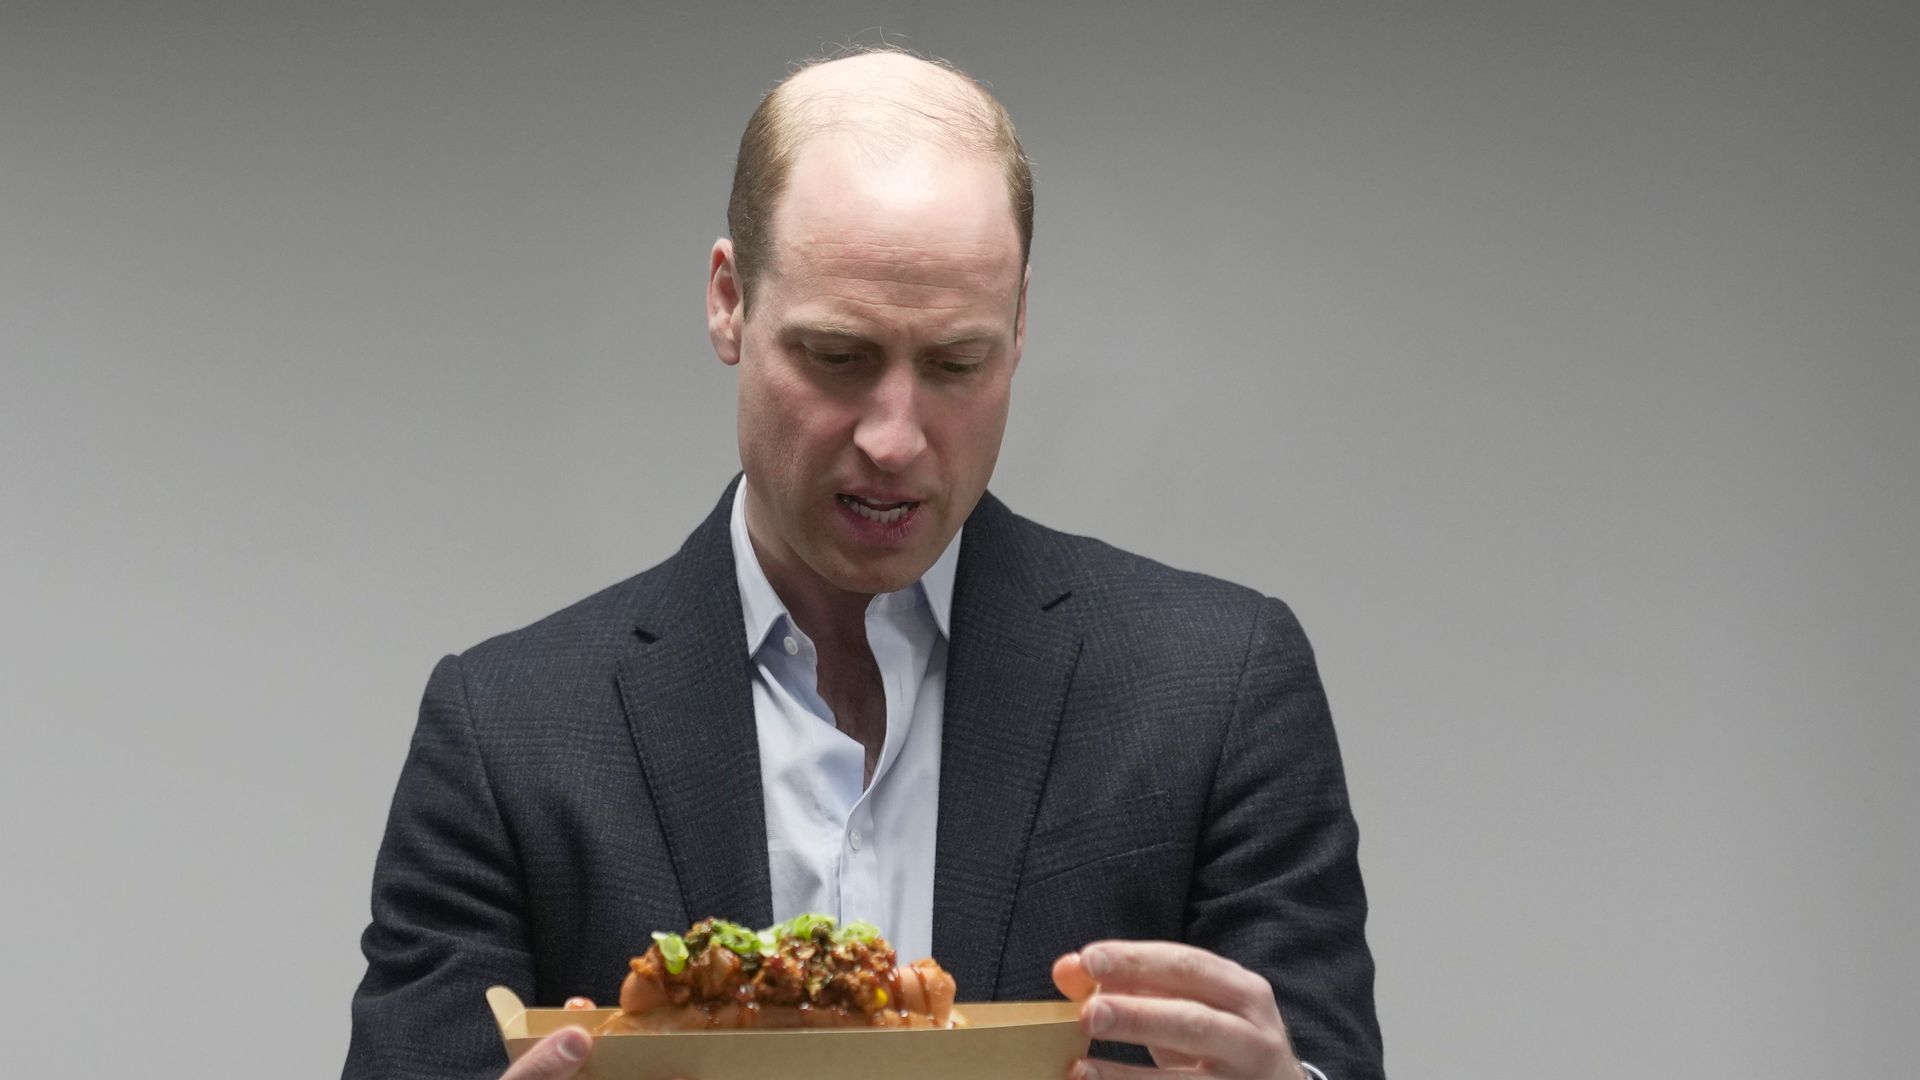 Prince William holding a seaweed-based good container